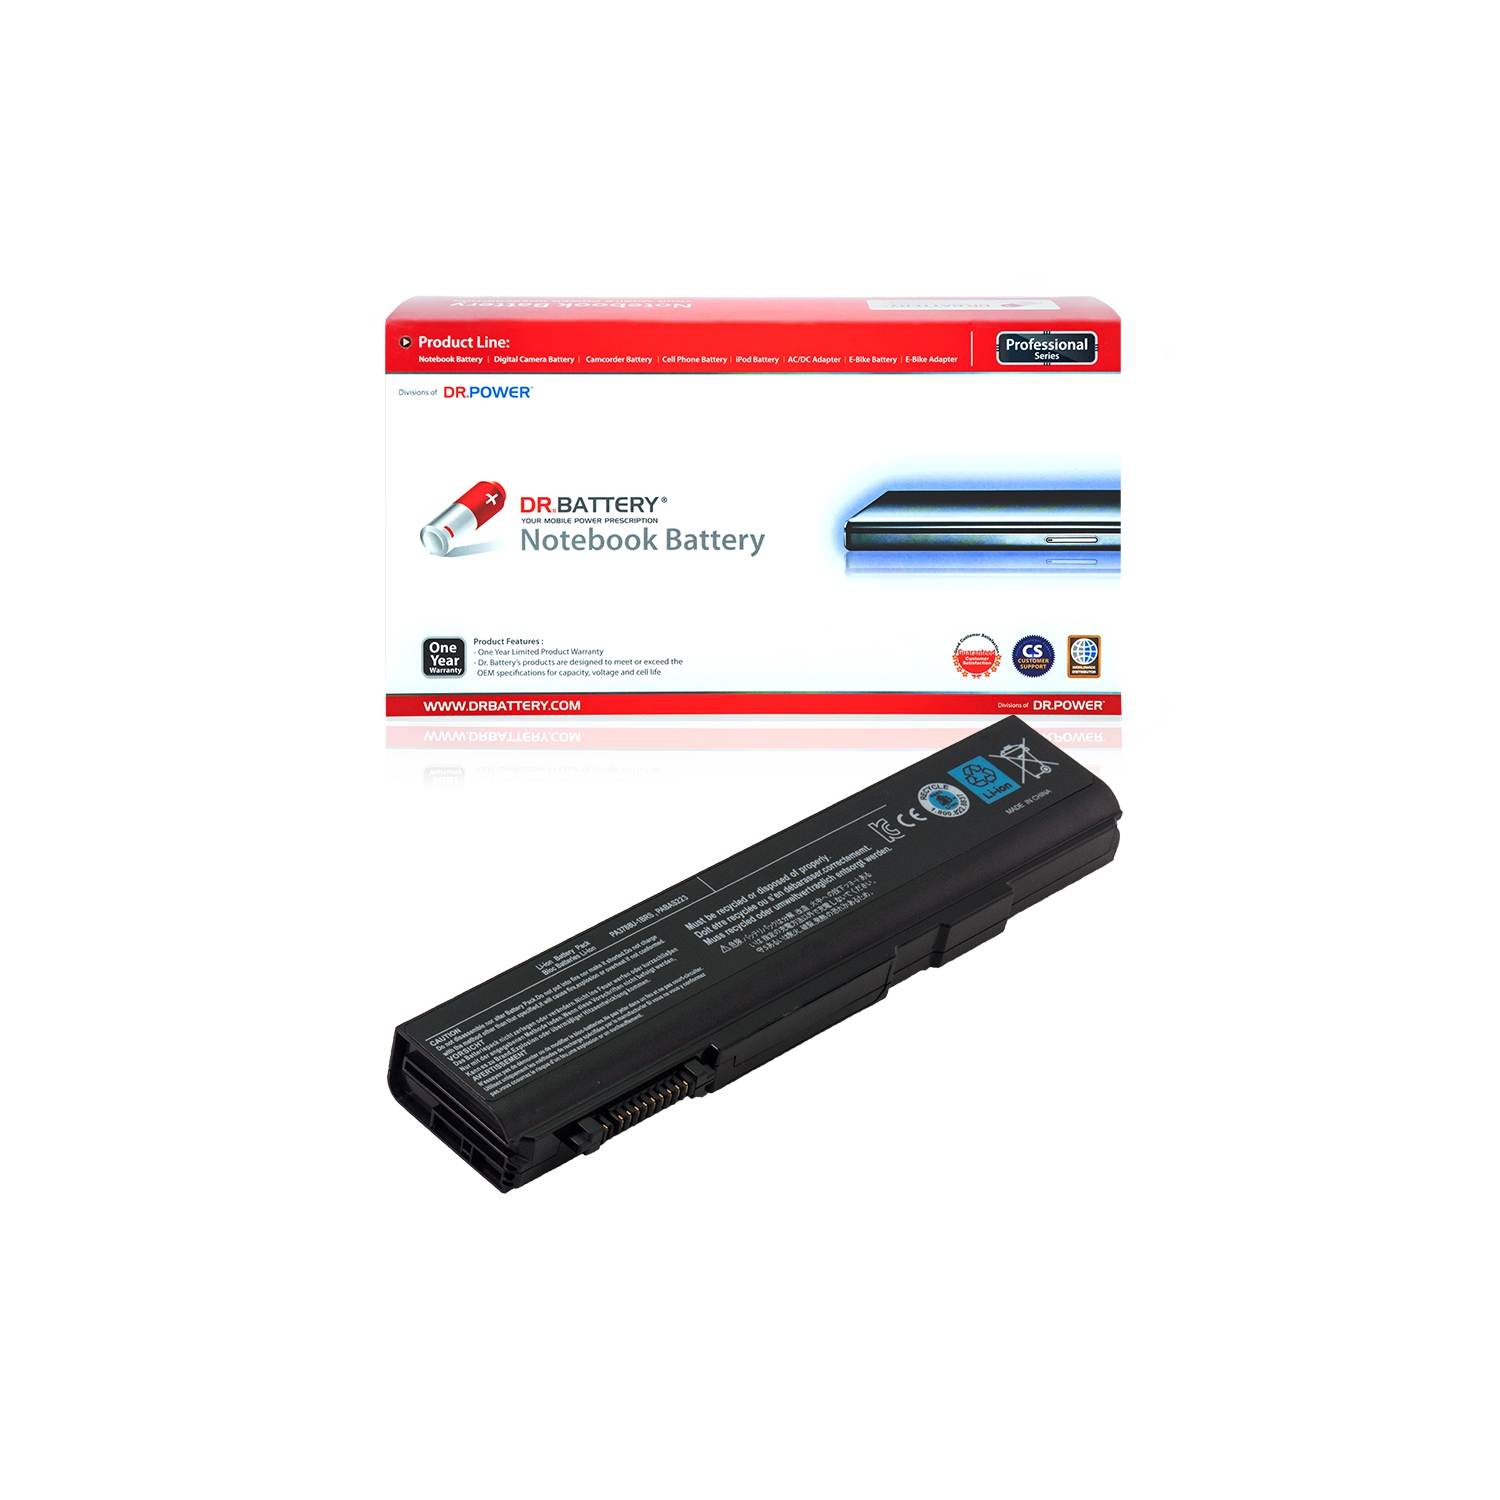 DR. BATTERY - Replacement for Toshiba Satellite Pro S500-0EE / S750 / PA3788U-1BRS / PABAS221 / PABAS222 / PABAS223